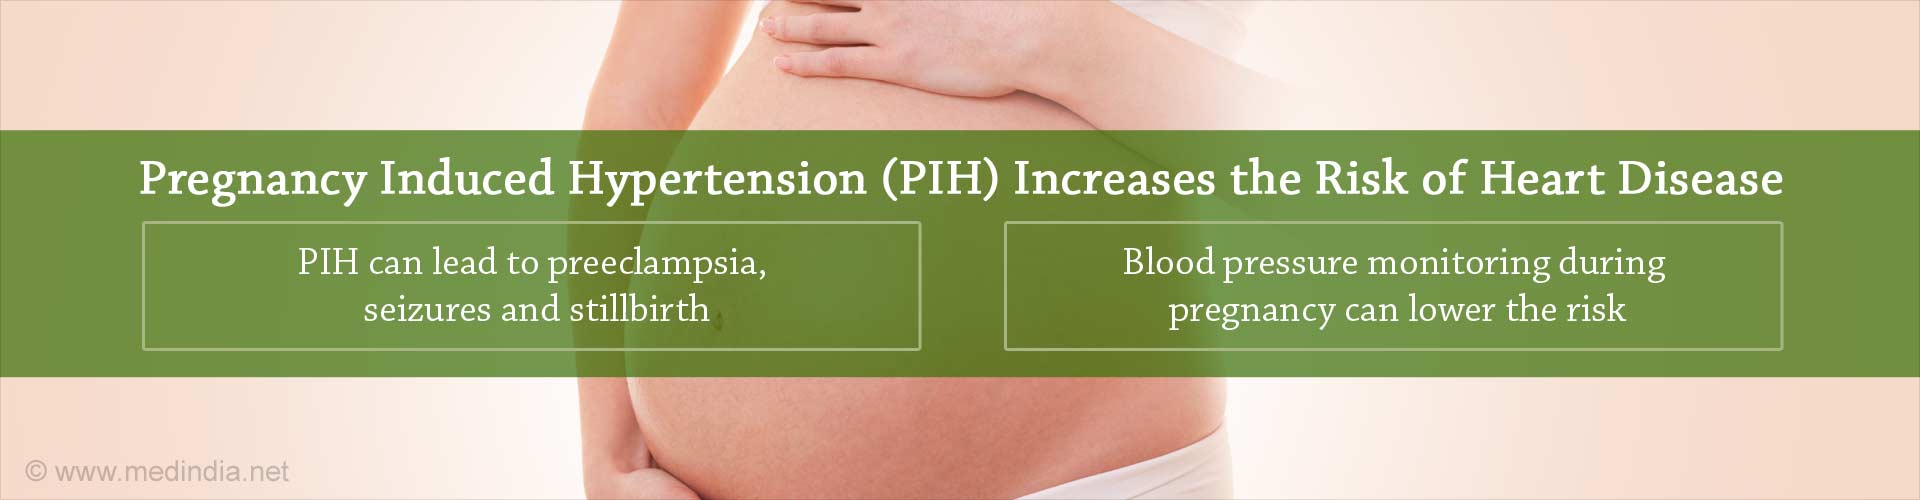 pregnancy induced hypertension (PIH) increases the risk of heart disease
- PIH can lead to pre-eclampsia, seizures and still birth
- blood pressure monitoring during pregnancy can lower the risk